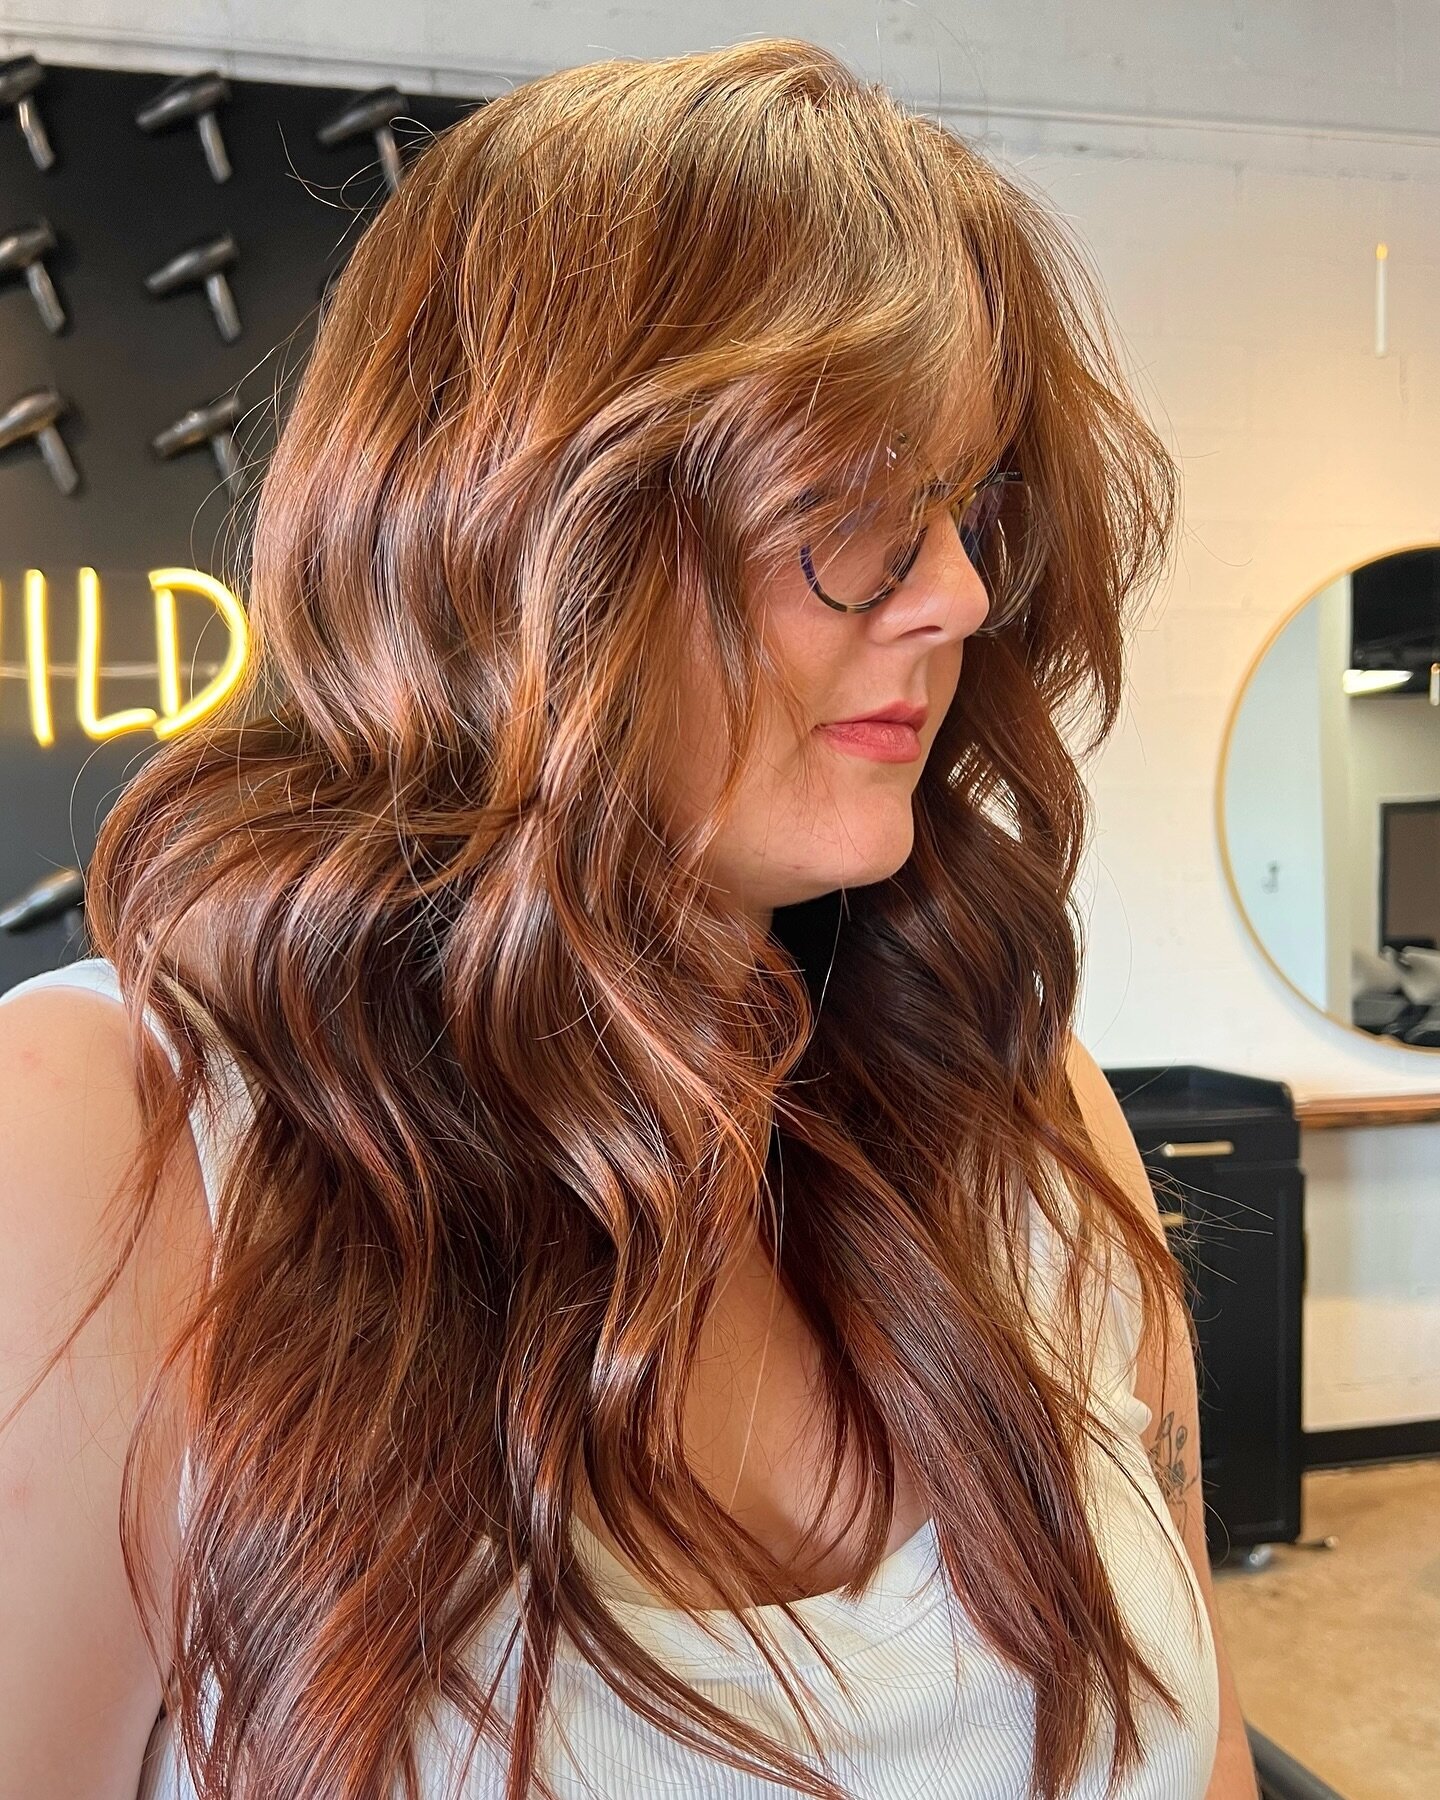 When copper and waves collide, magic happens. Start 2024 with the hair you deserve. Book today! 🦁✨

Hair by: @my_hair_paige303 

#beamanechick #dontbeasidechick #thorntonsalon #thorntonco #lanzahealinghaircare